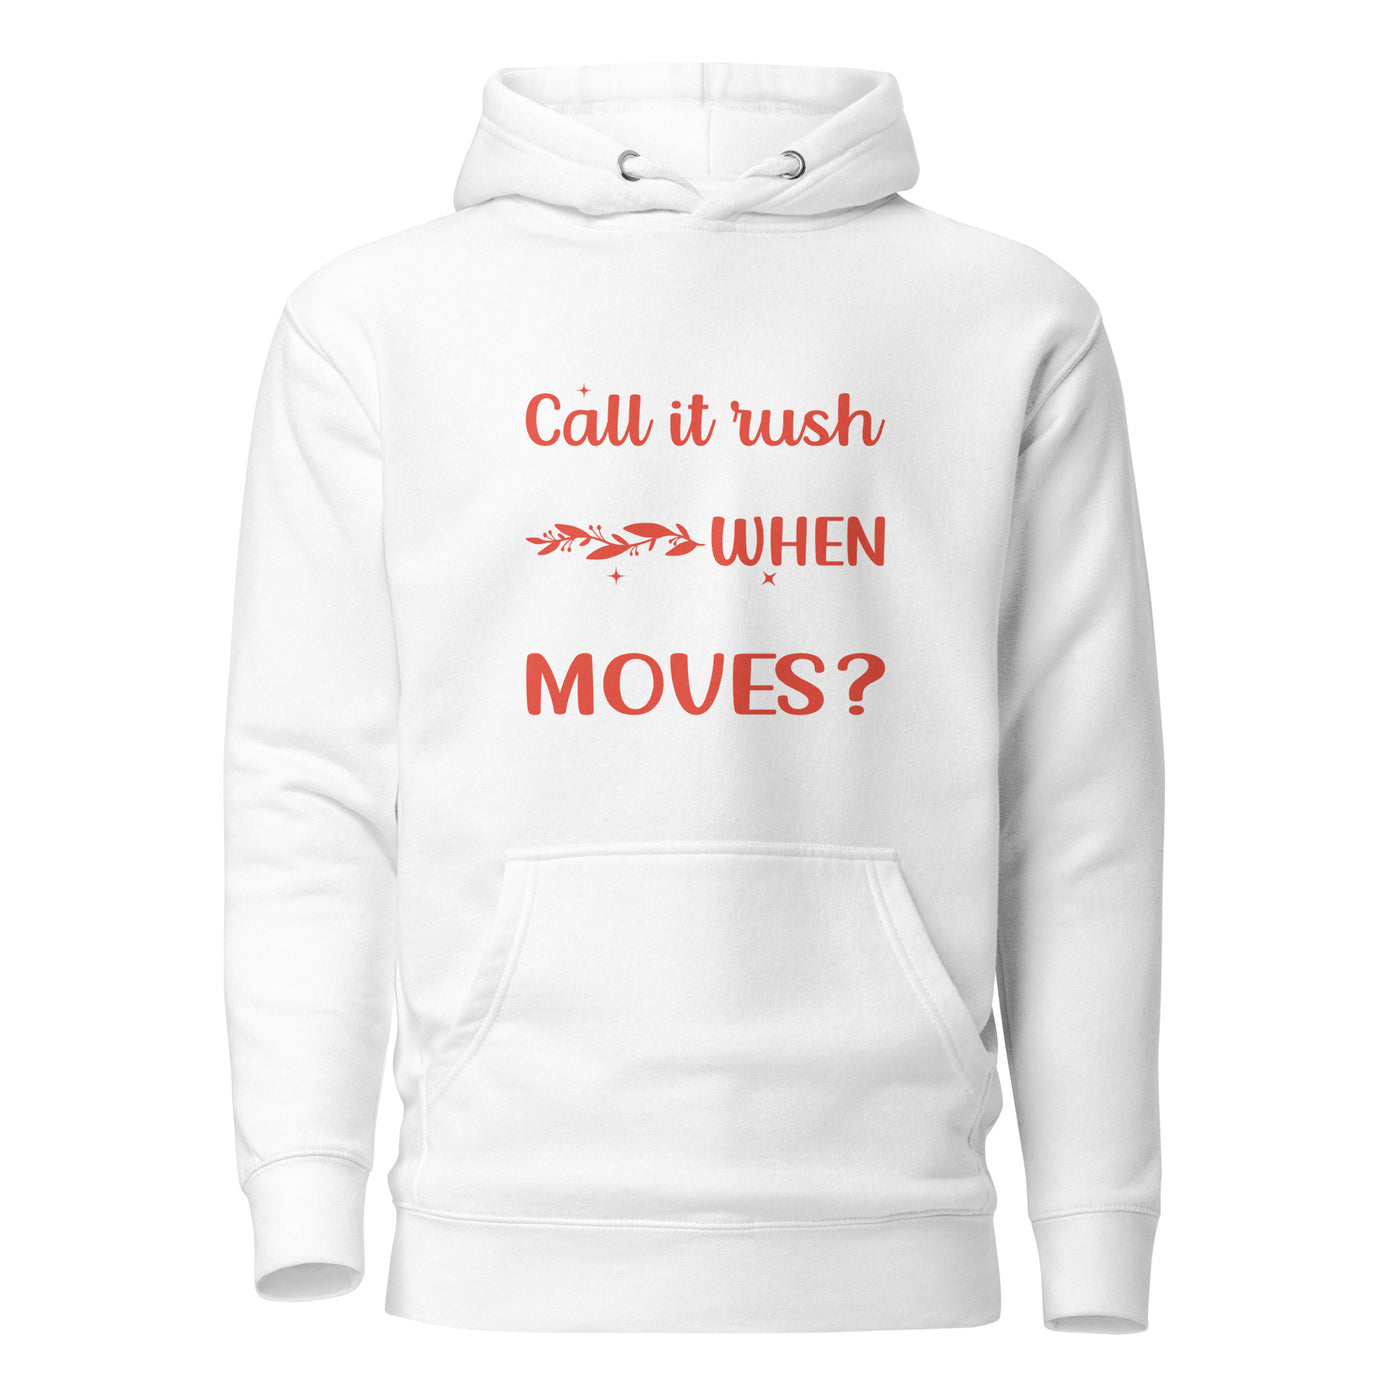 Why do they say Wish Hours, when nothing moves? - Unisex Hoodie